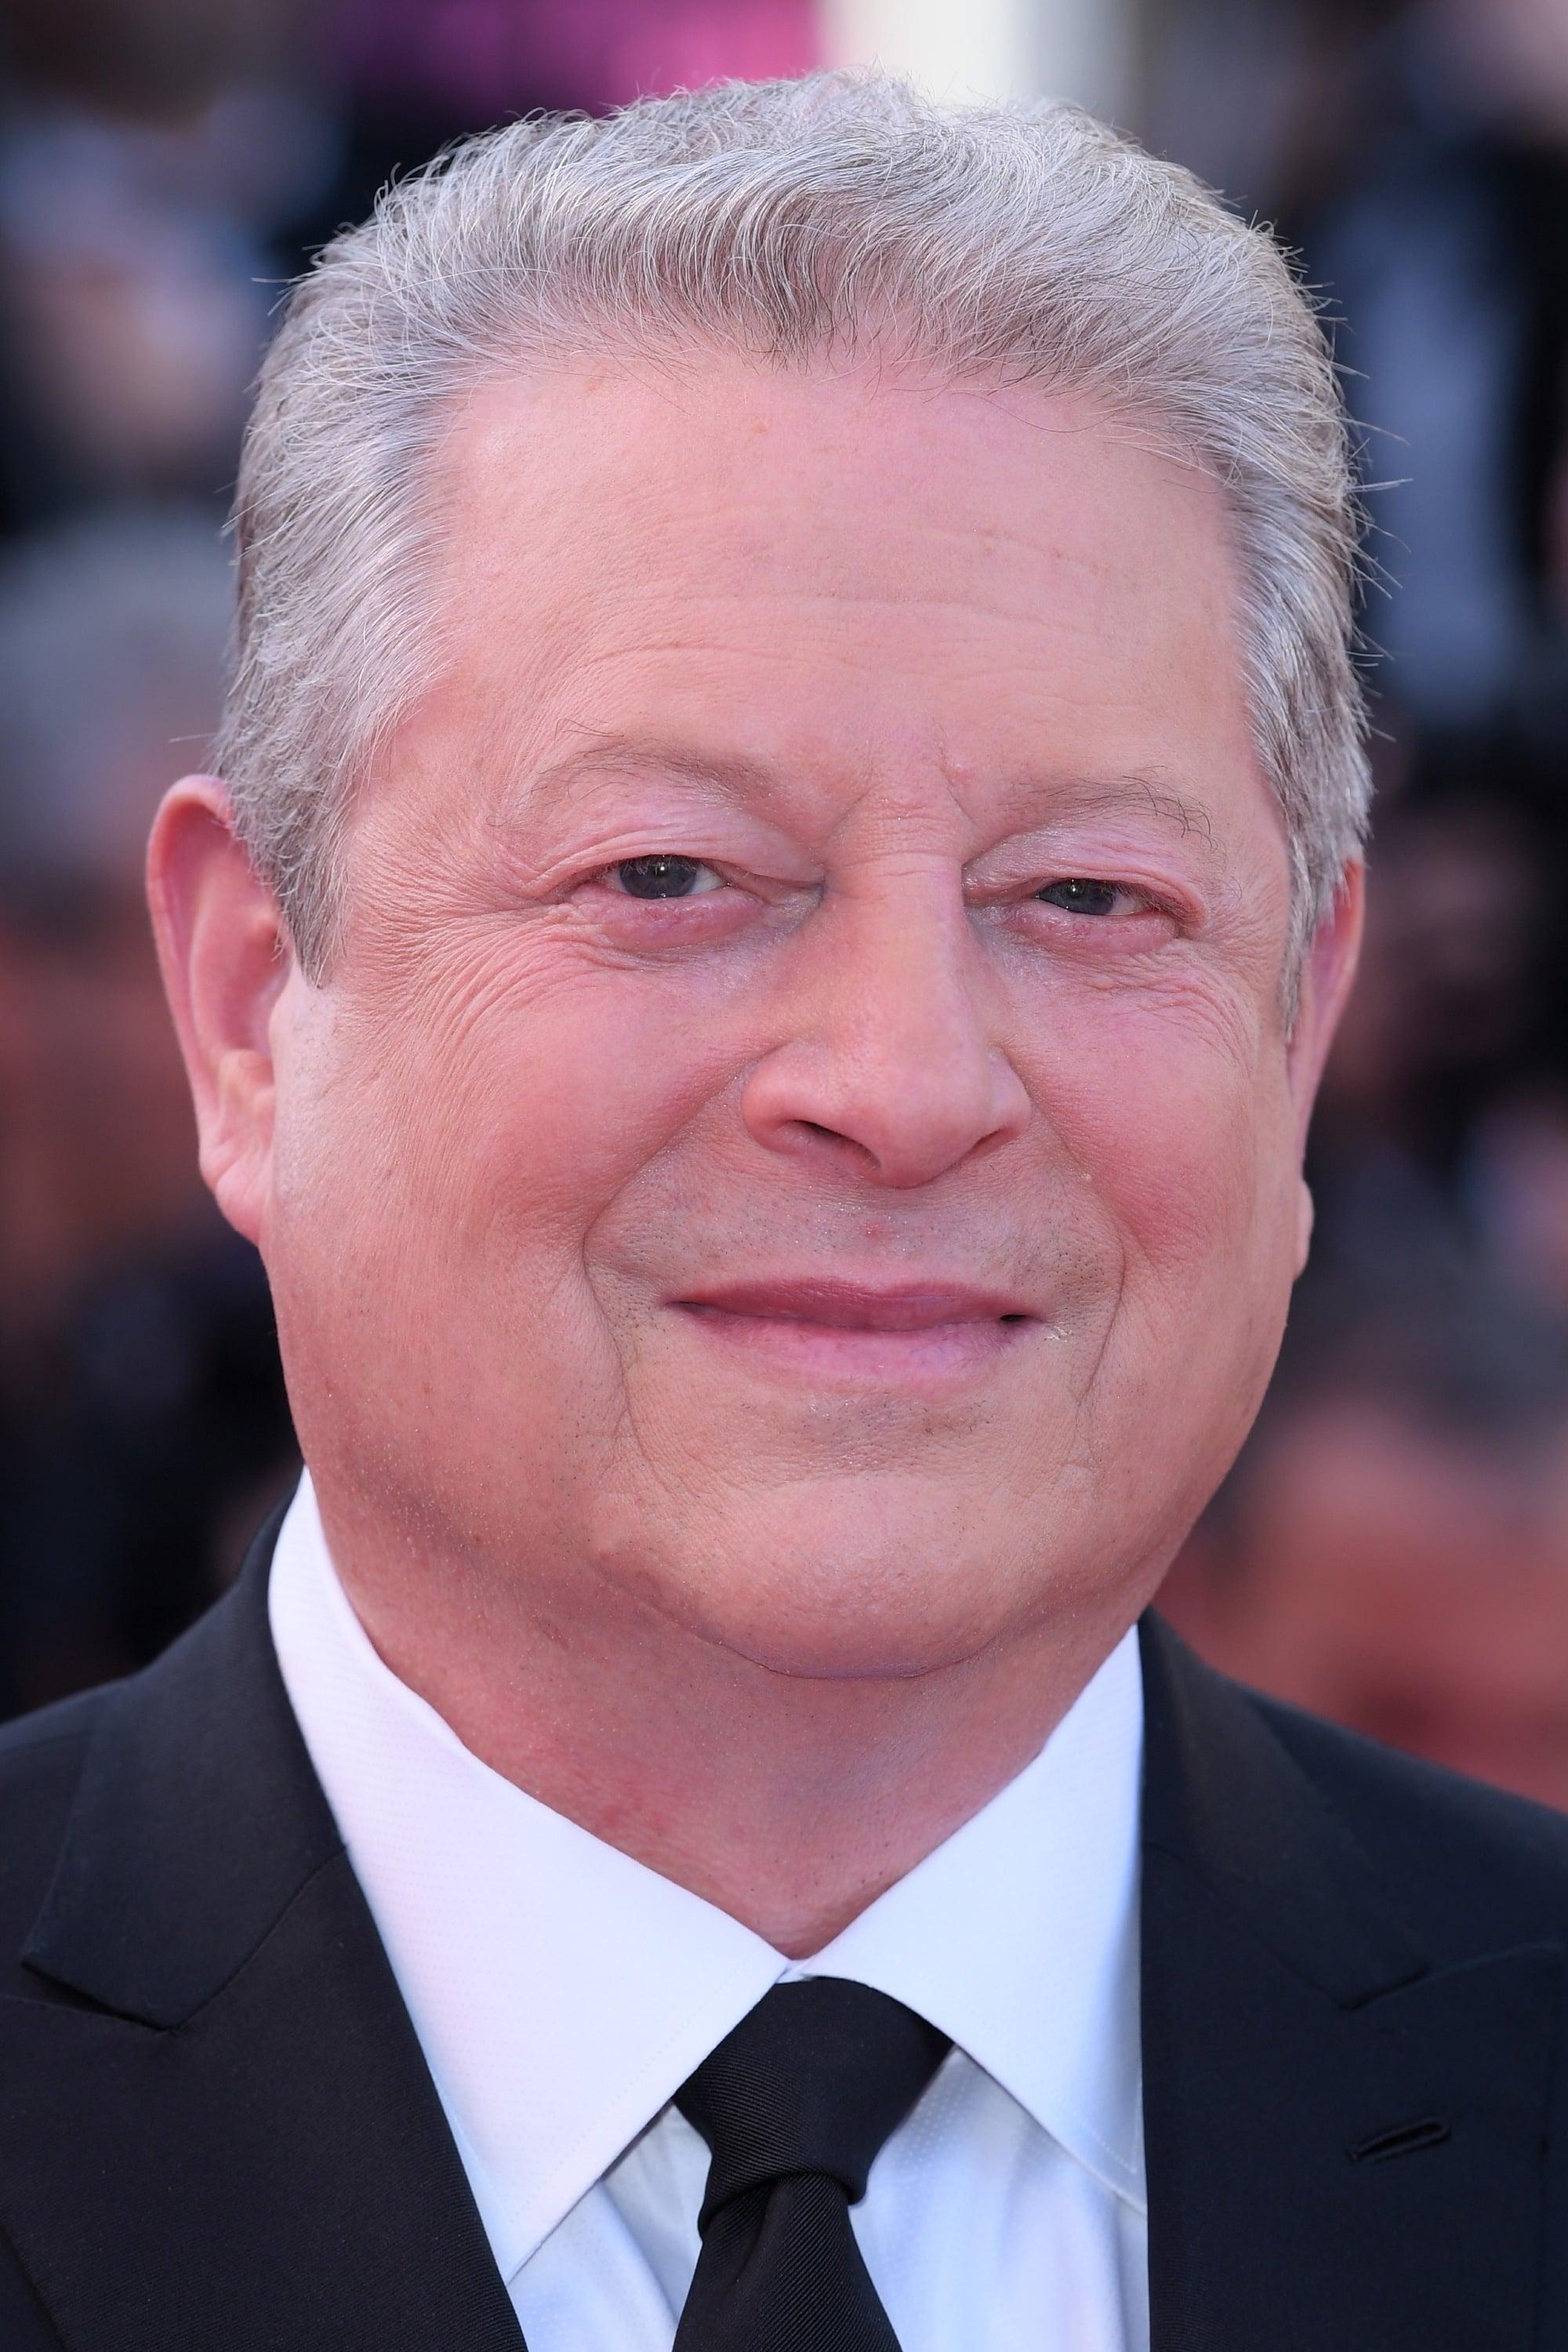 Al Gore | Self - Former Vice-President of the United States (archive footage)